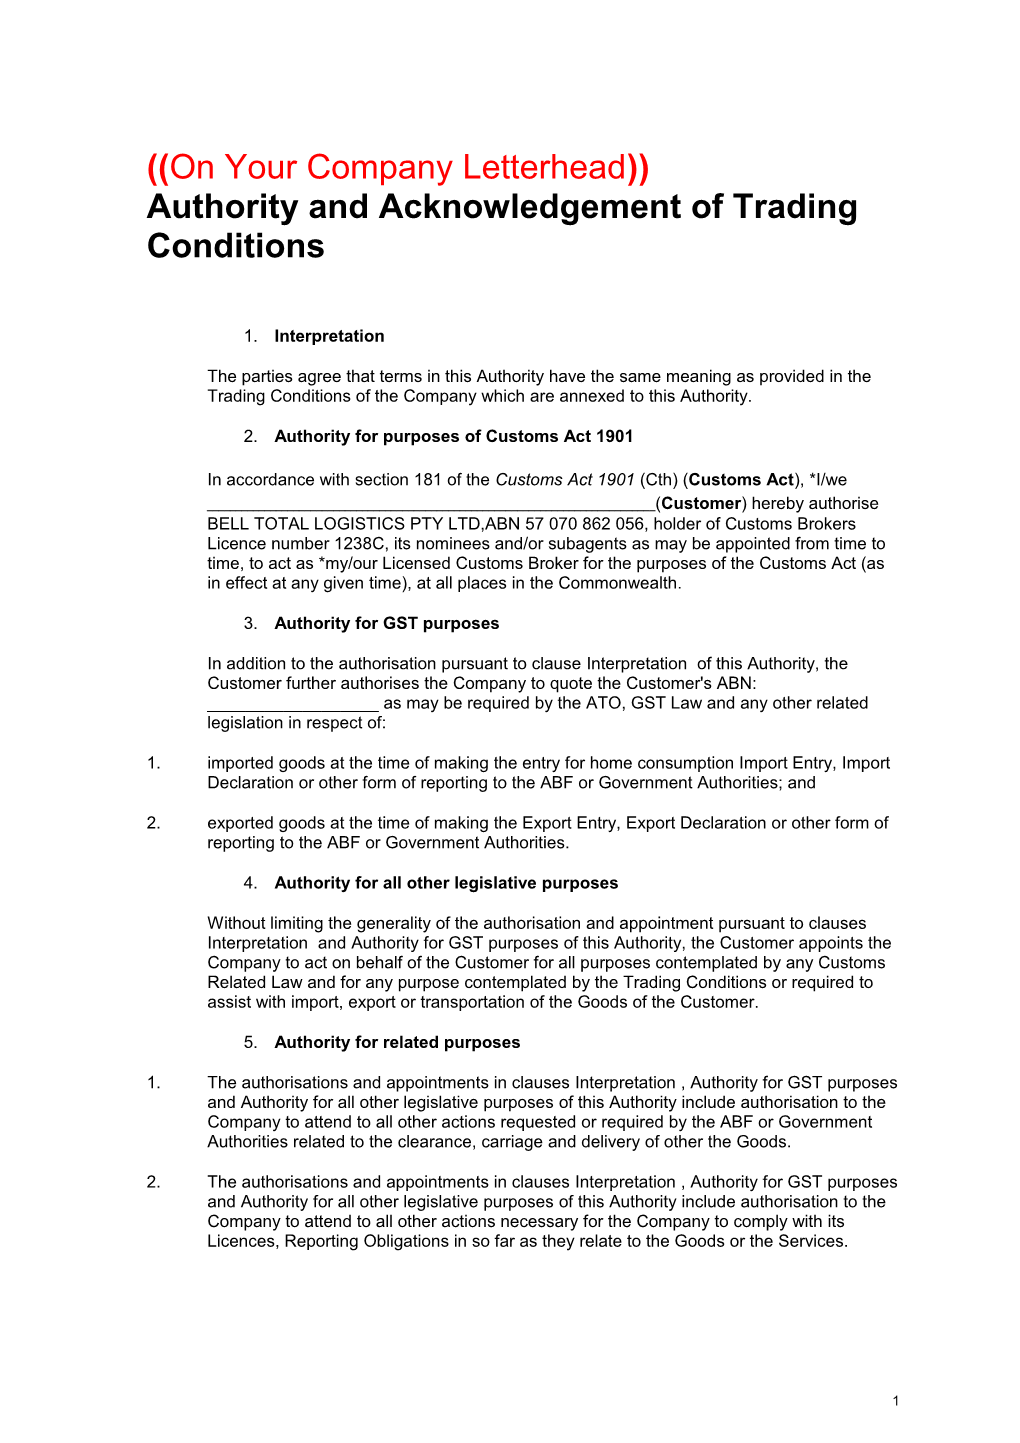 Authority and Acknowledgement of Trading Conditions